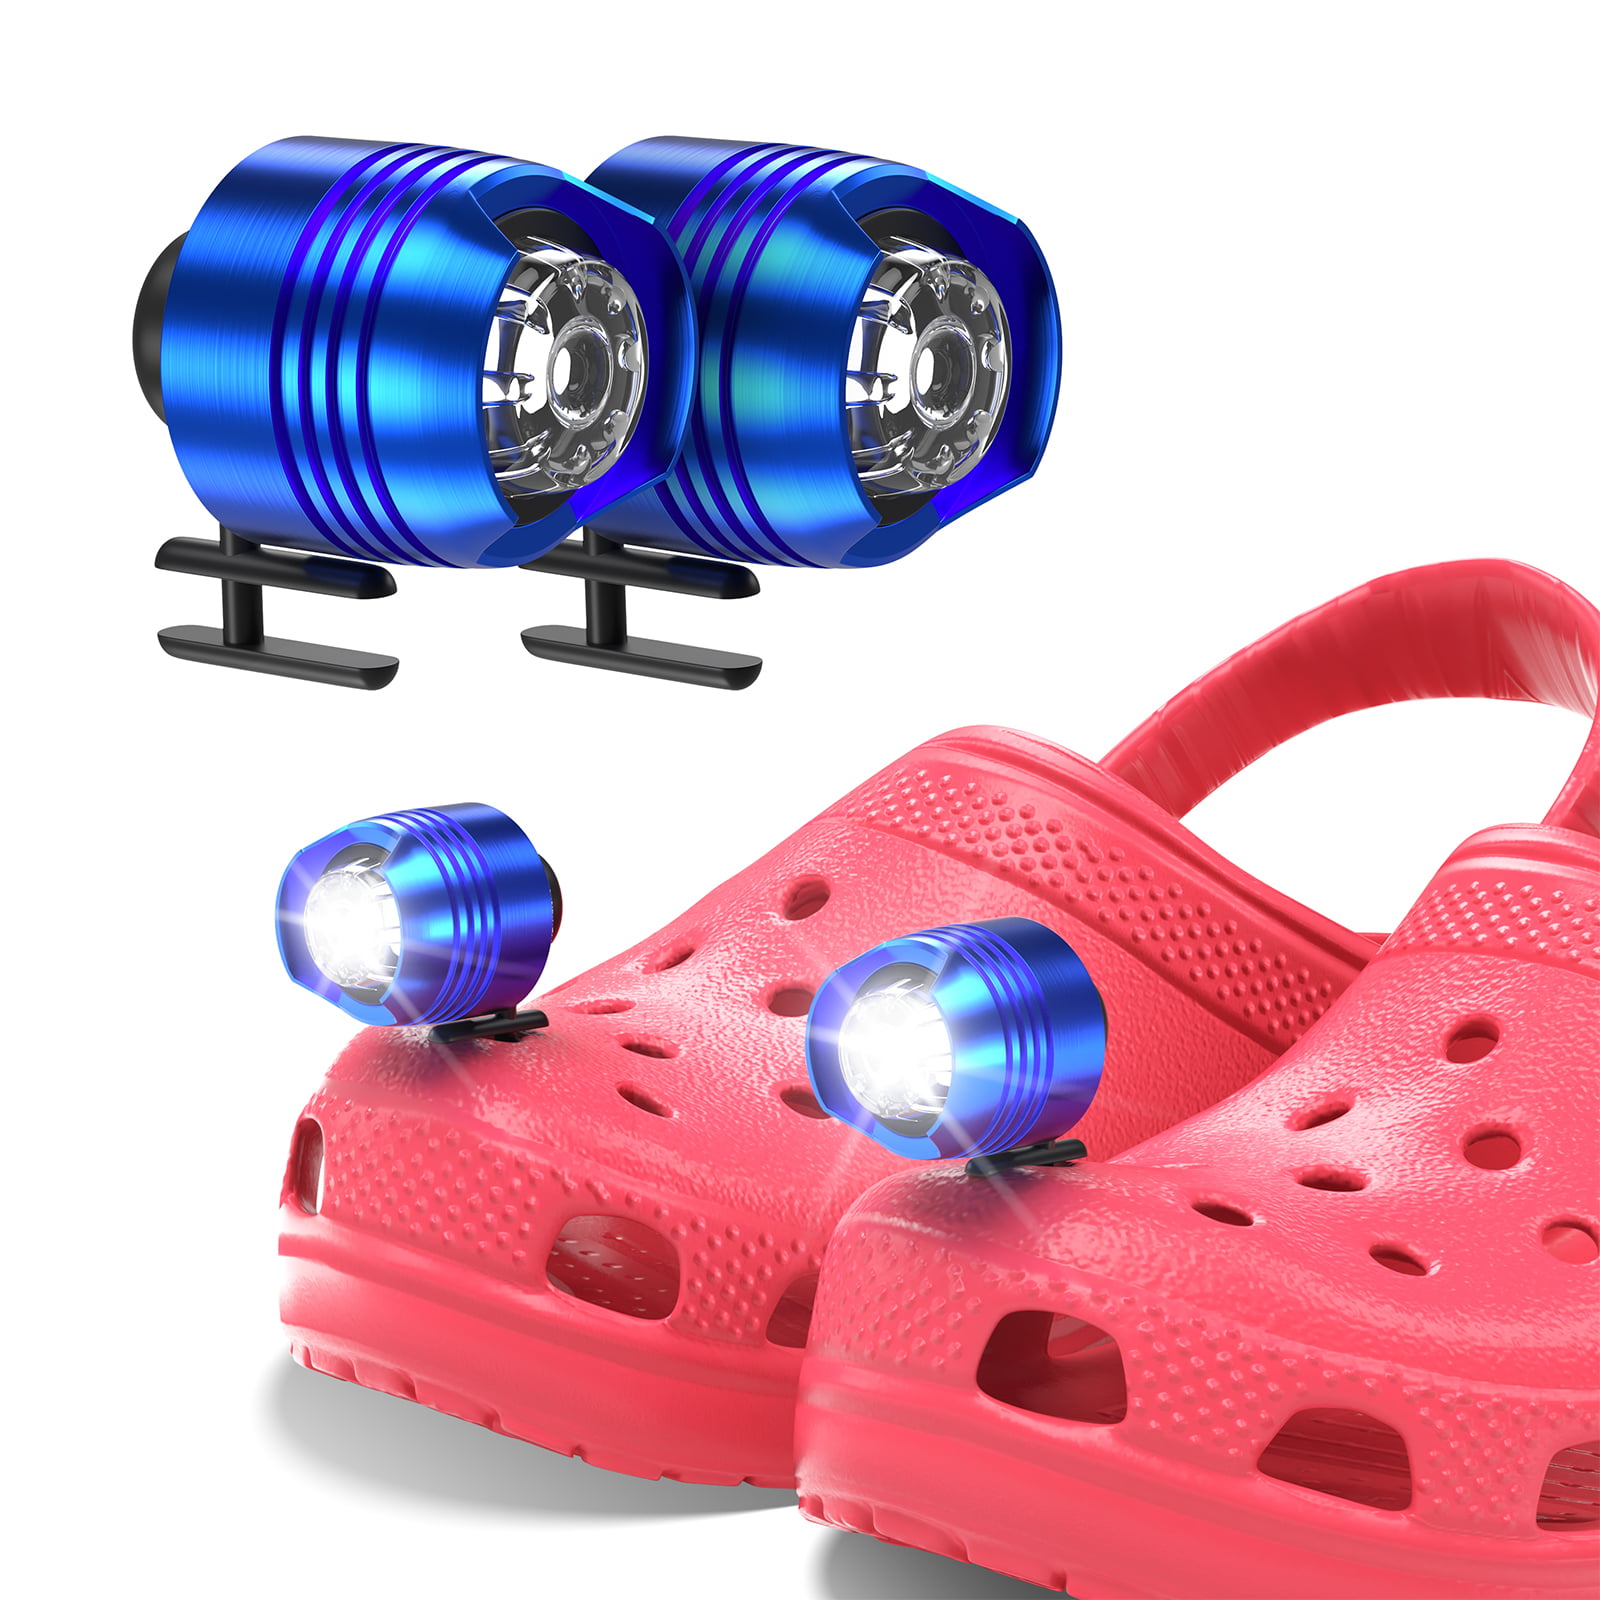 Yontune 2X Headlights for Croc Shoe Decoration Accessories for Running ...